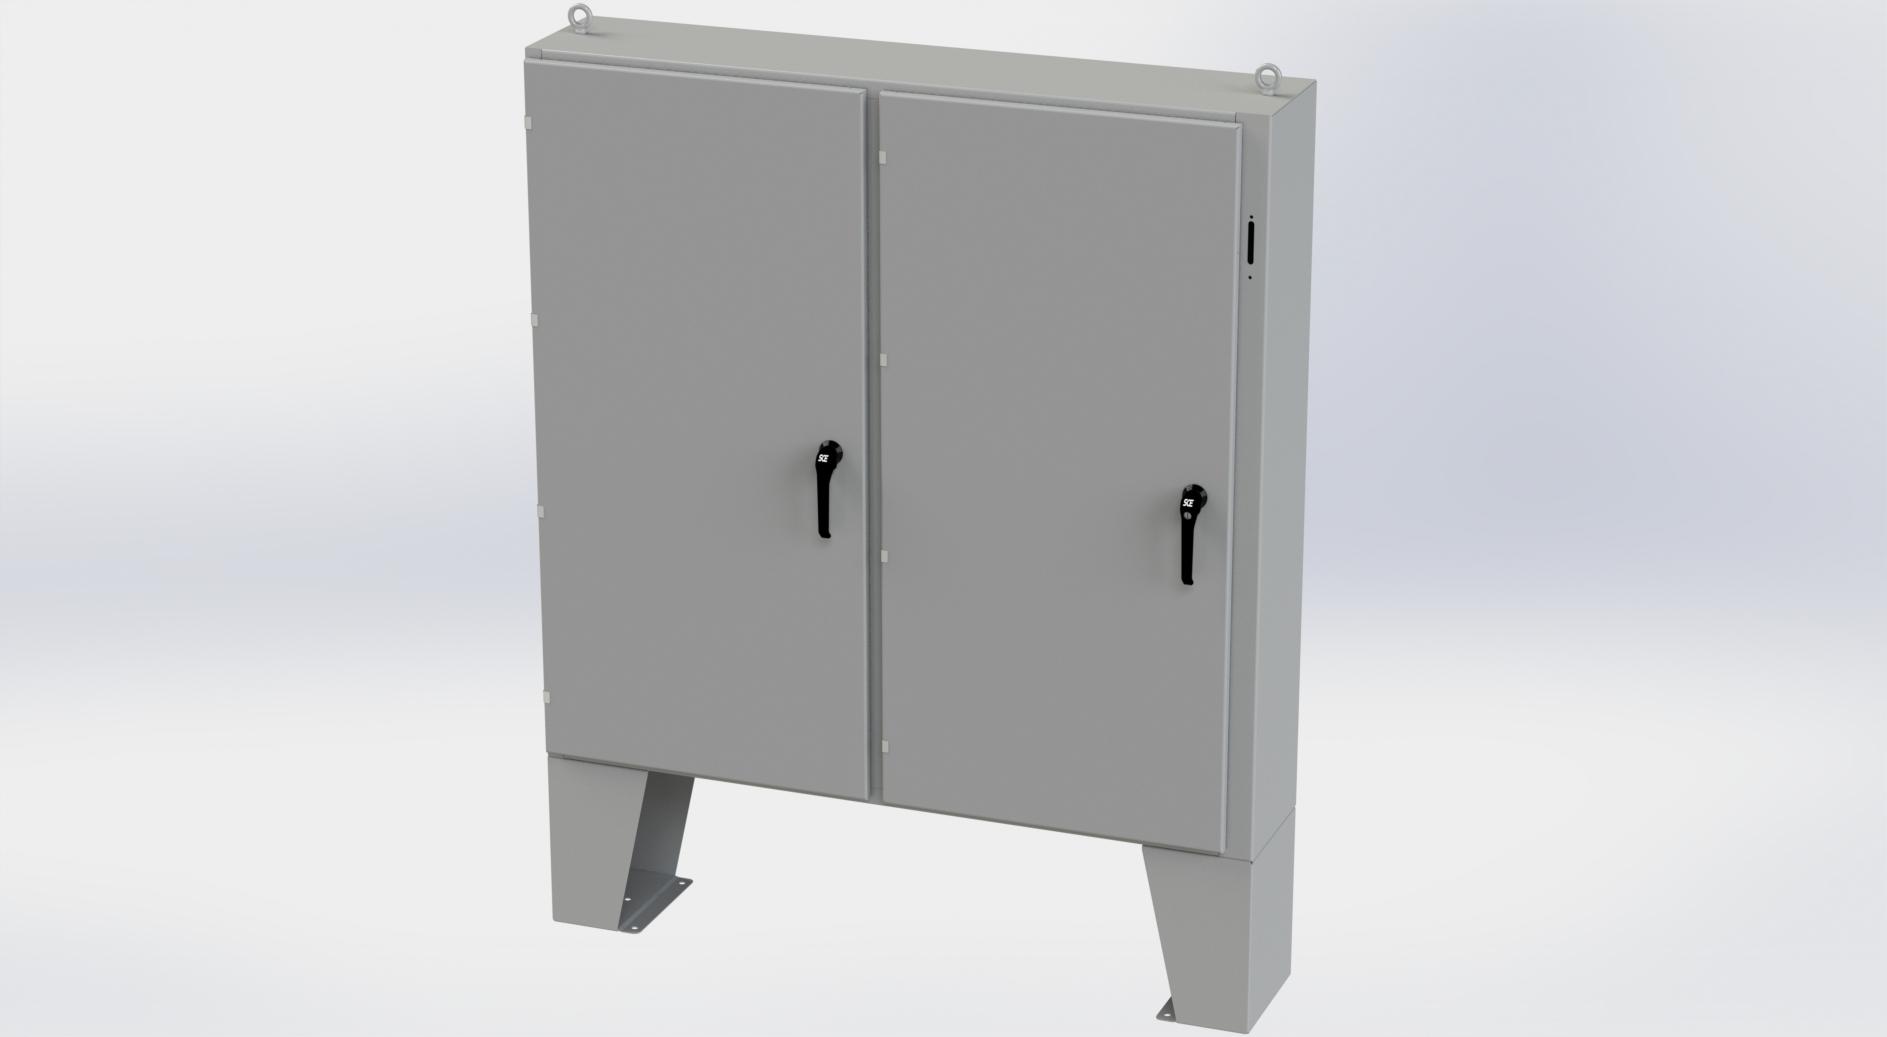 Saginaw Control SCE-60XEL6112LP 2DR XEL Enclosure, Height:60.00", Width:61.00", Depth:12.00", ANSI-61 gray powder coating inside and out. Optional sub-panels are powder coated white.